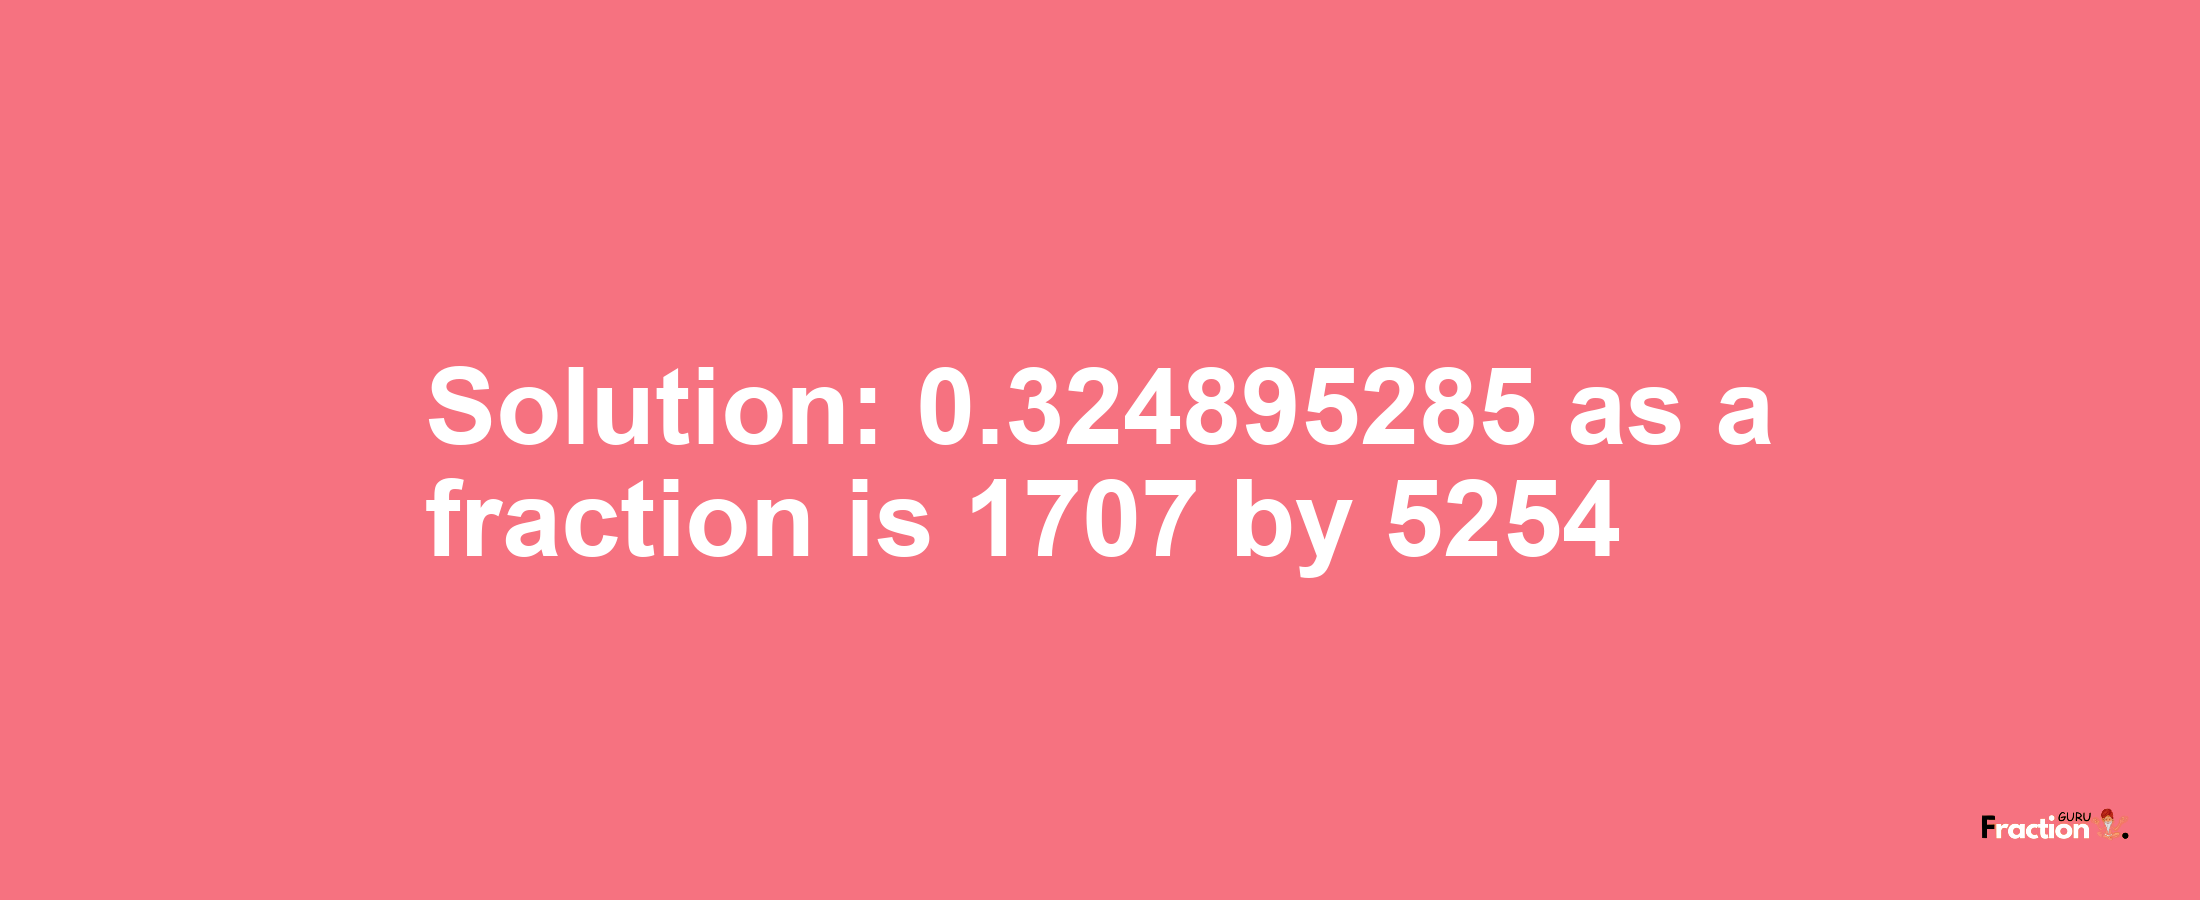 Solution:0.324895285 as a fraction is 1707/5254